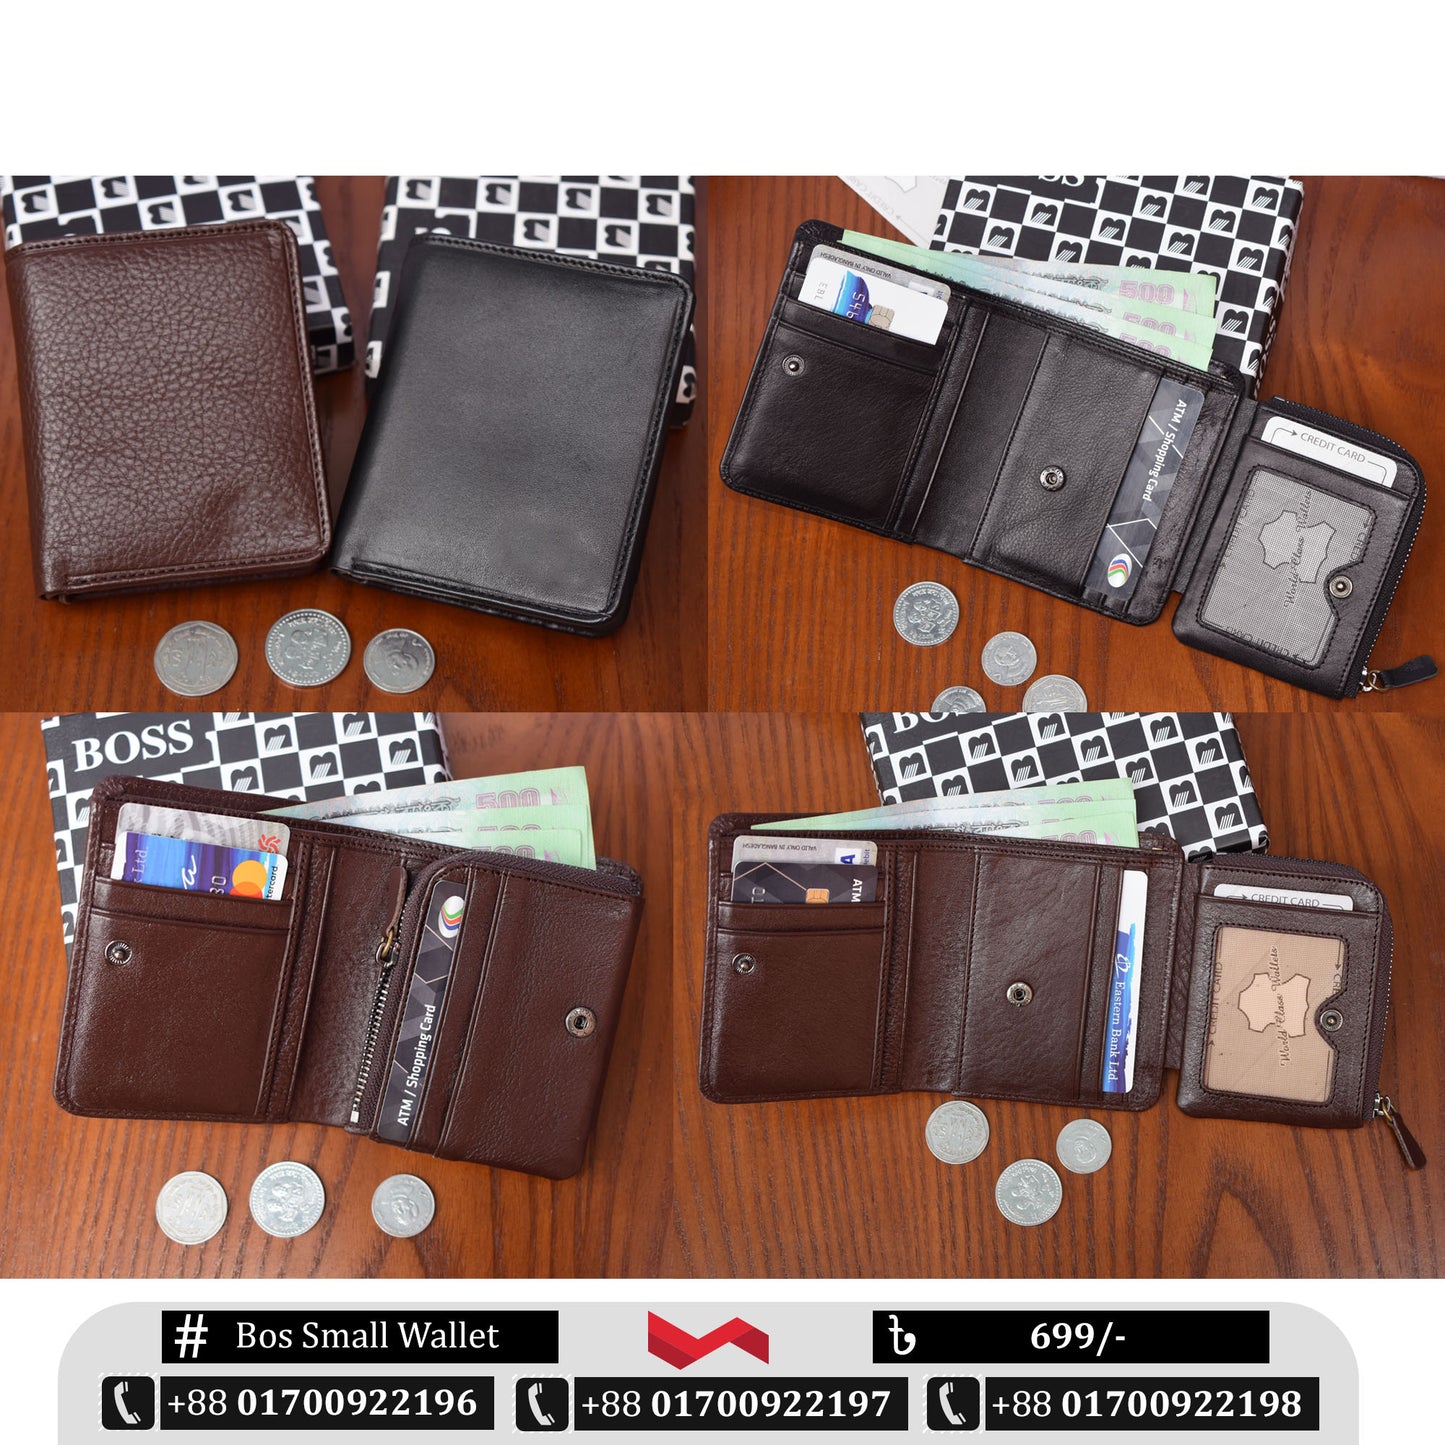 Mini Pocket Size Leather Wallet - Black & Chocolate Color Available